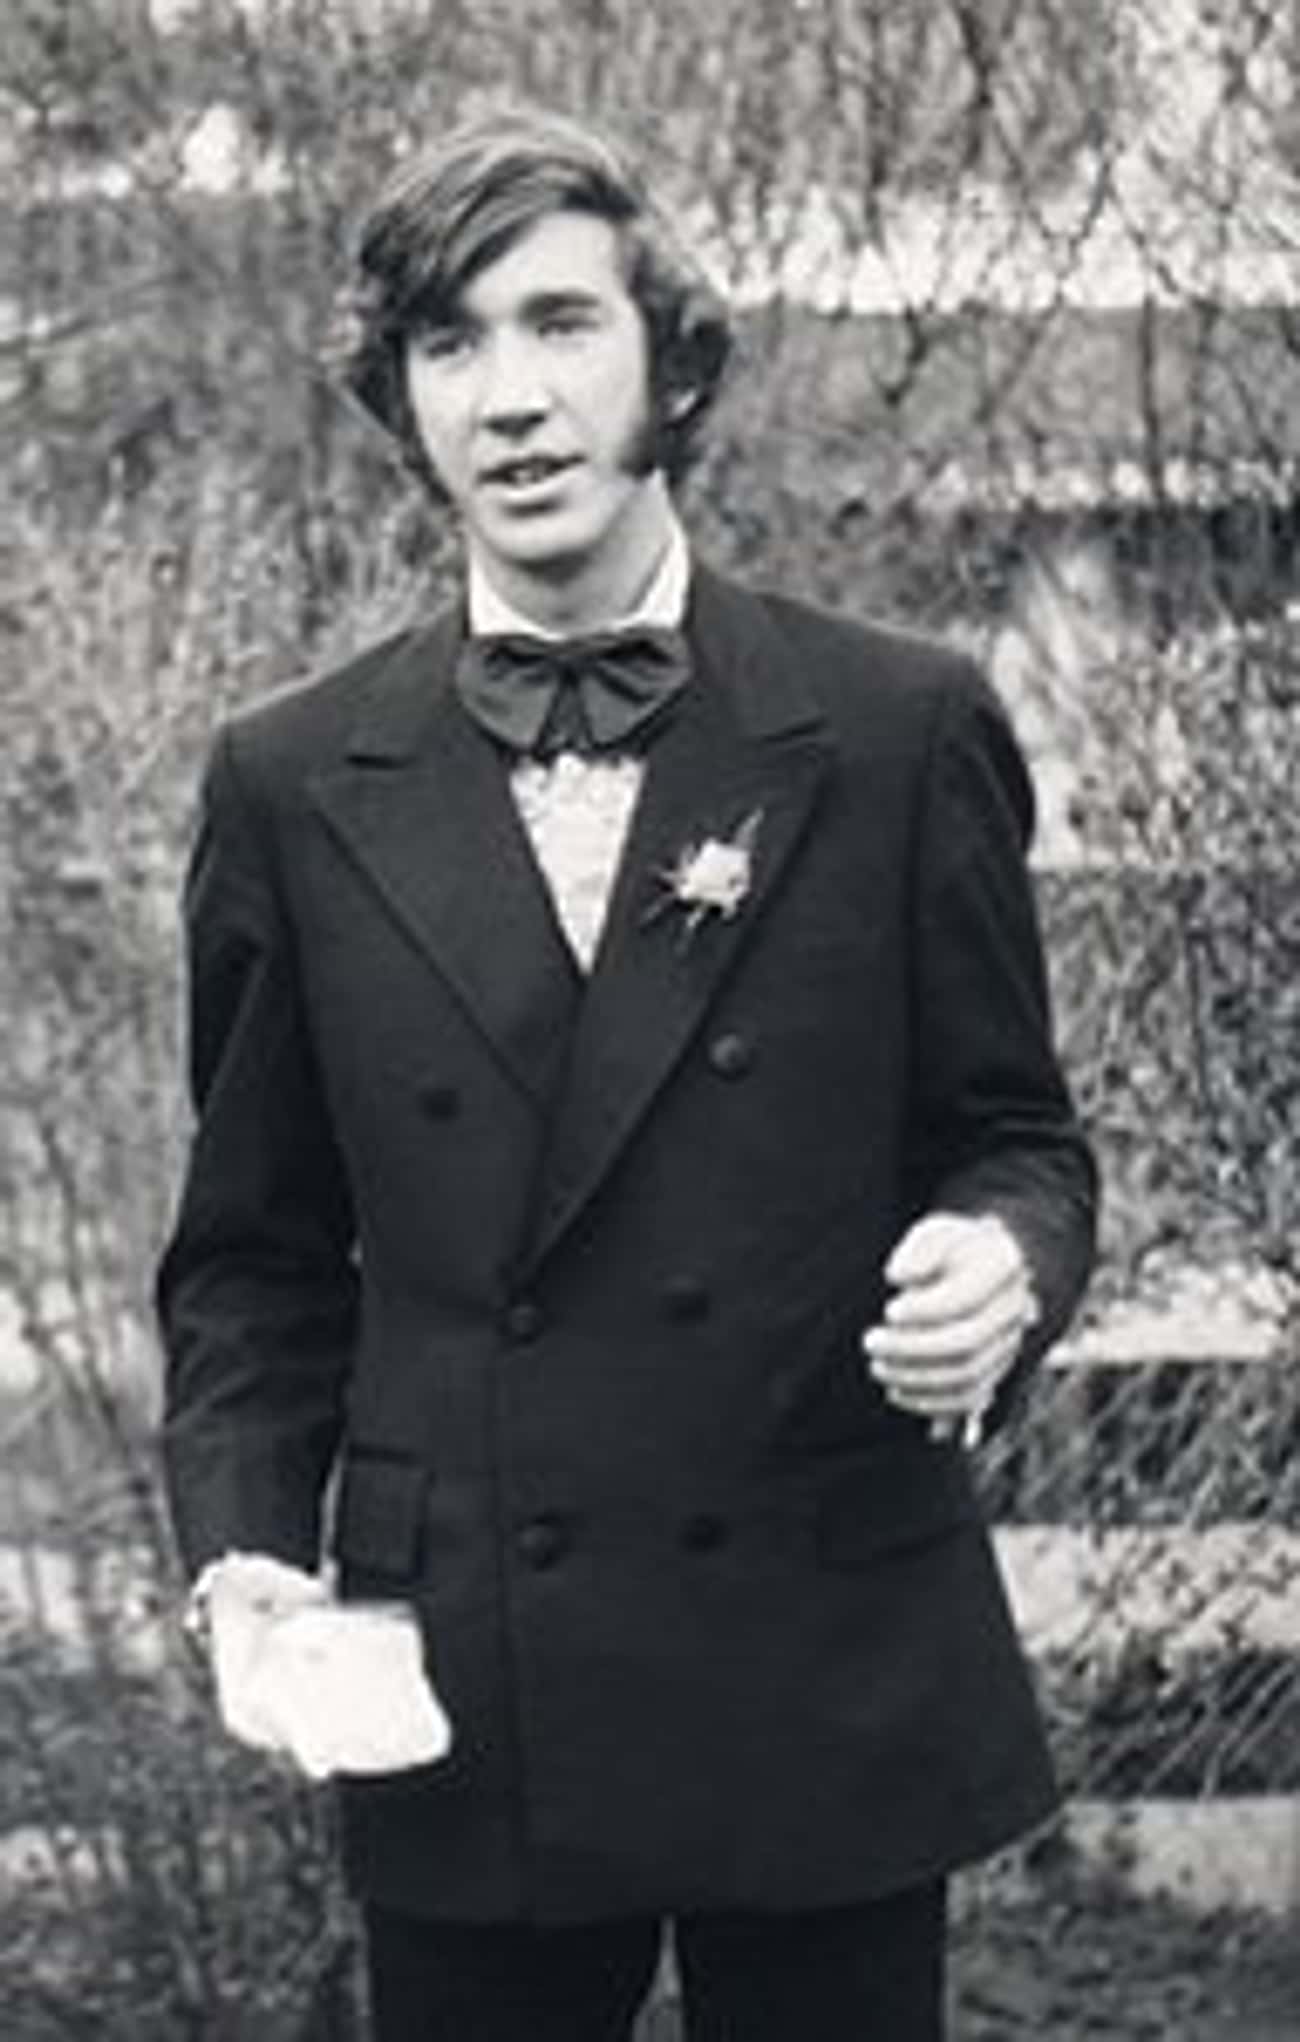 Young Alan Rickman in Black Coat and Bowtie